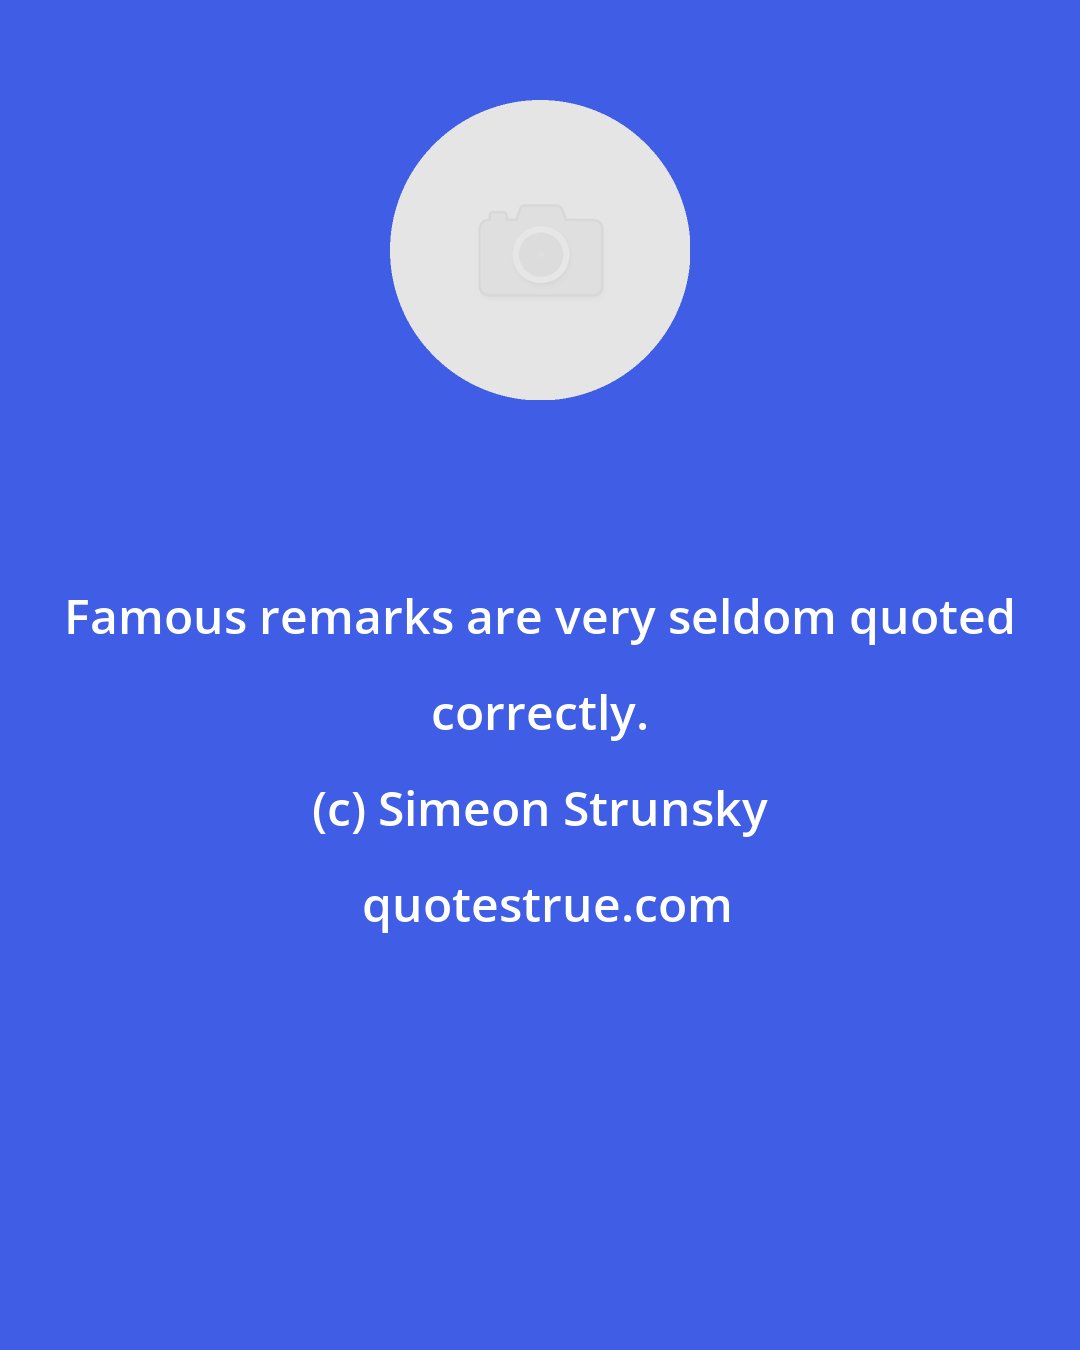 Simeon Strunsky: Famous remarks are very seldom quoted correctly.